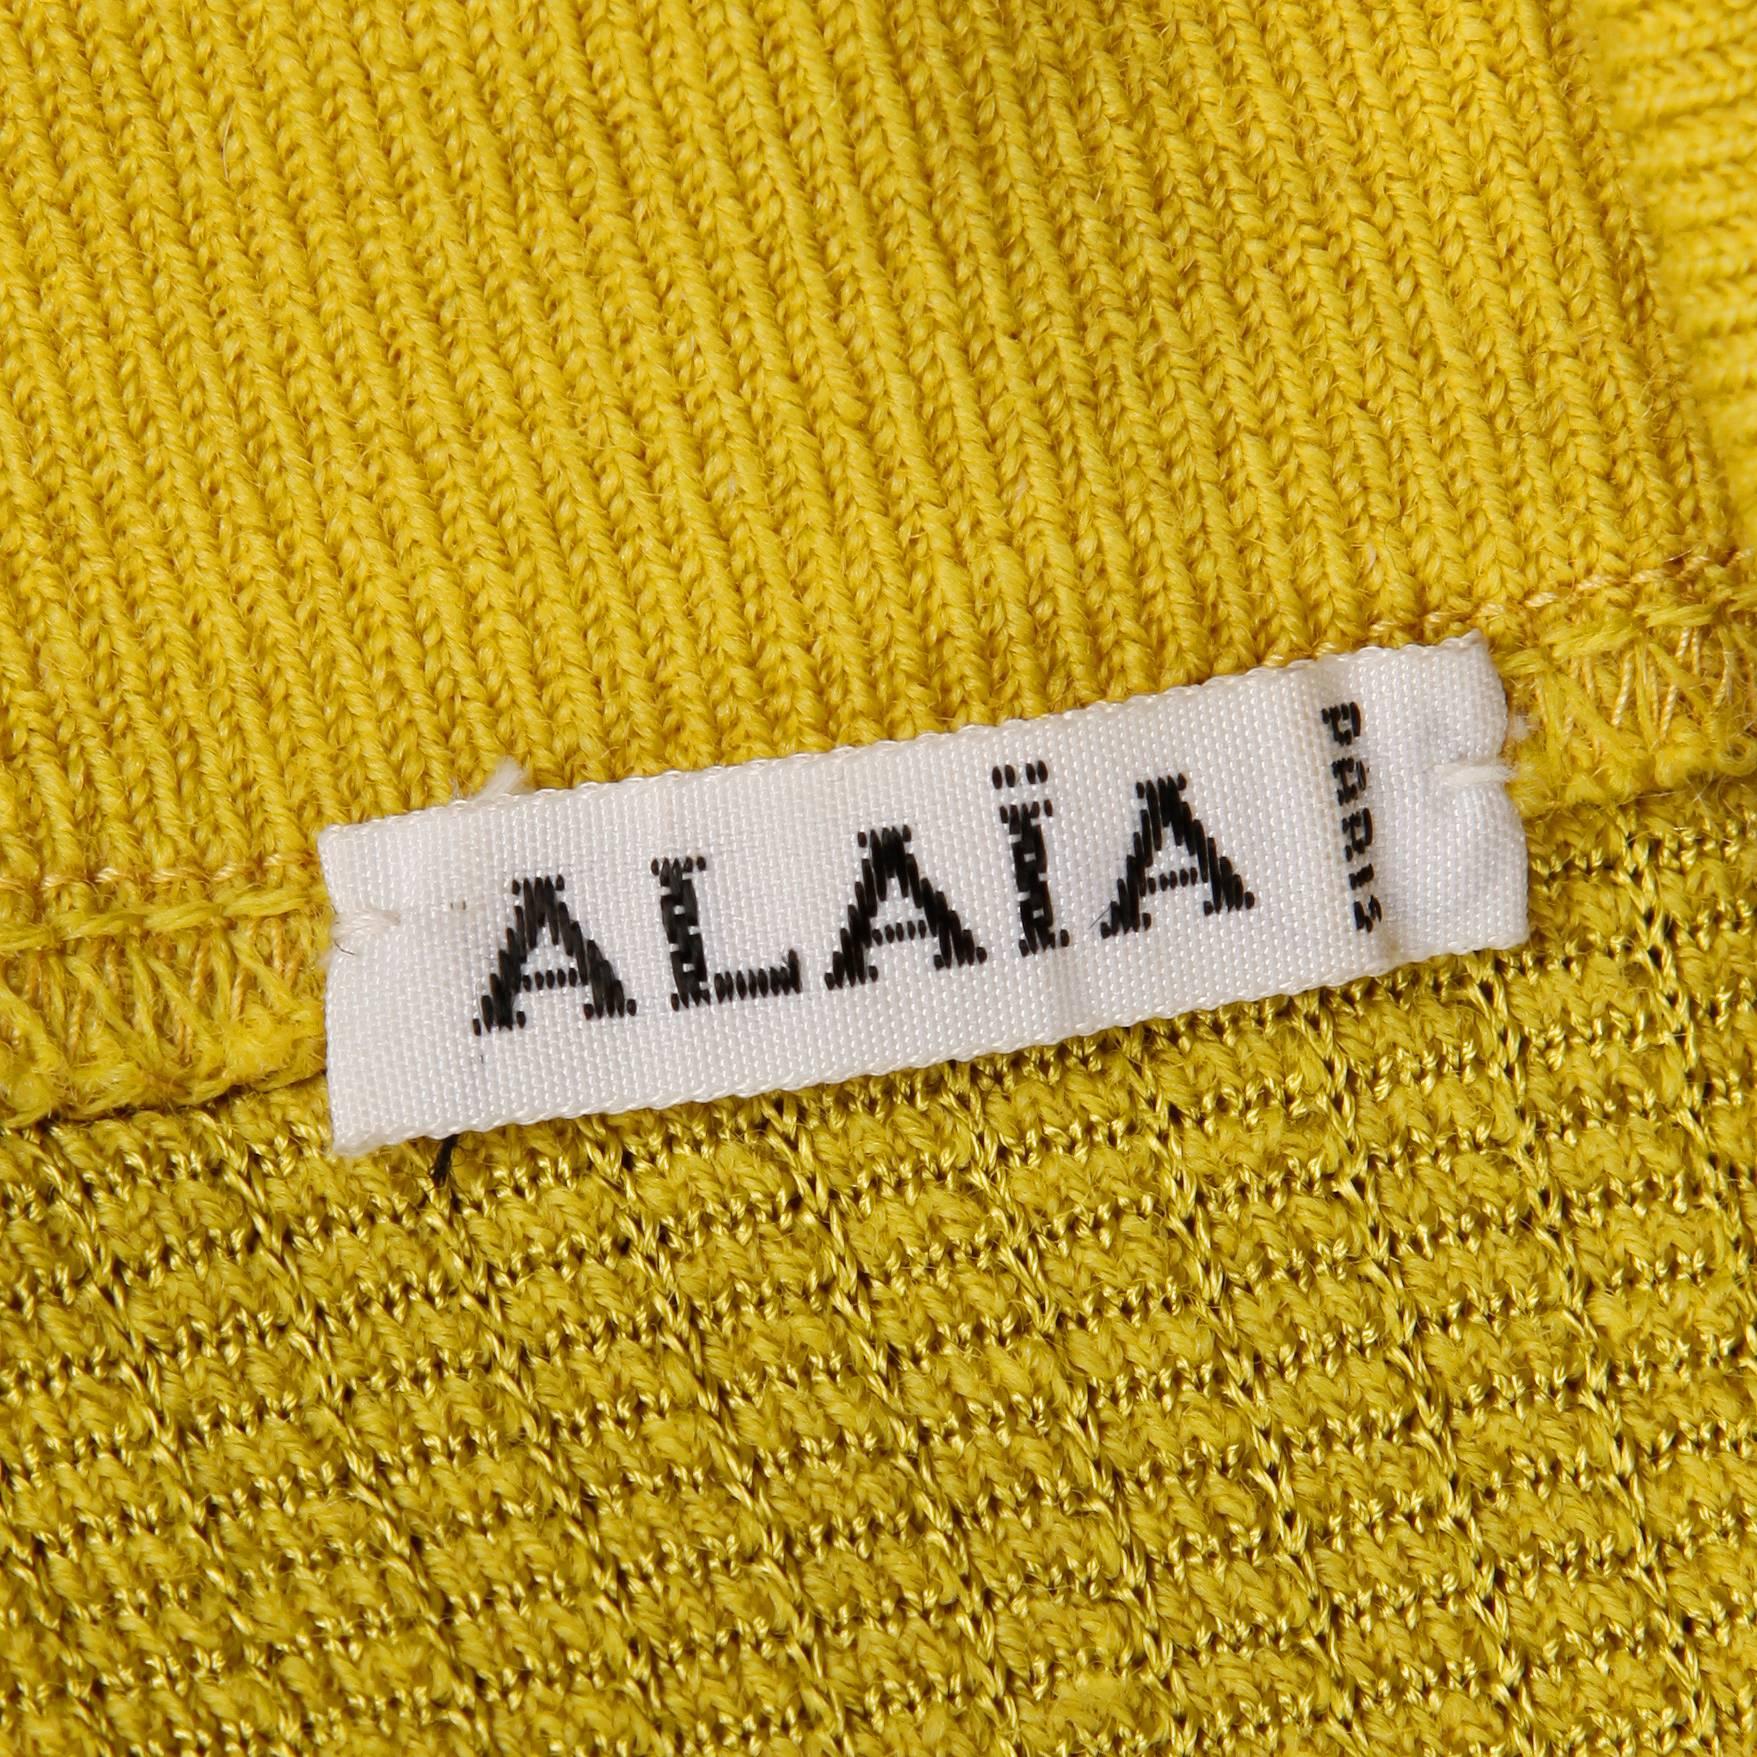 Vintage Alaia cropped turtleneck sweater in vibrant chartreuse knit! Fabric content is 50% rayon, 46% wool, 5% spandex. The marked size is medium and the sweater fits like a modern size small-medium. The bust measures 38-44", waist 24-29",